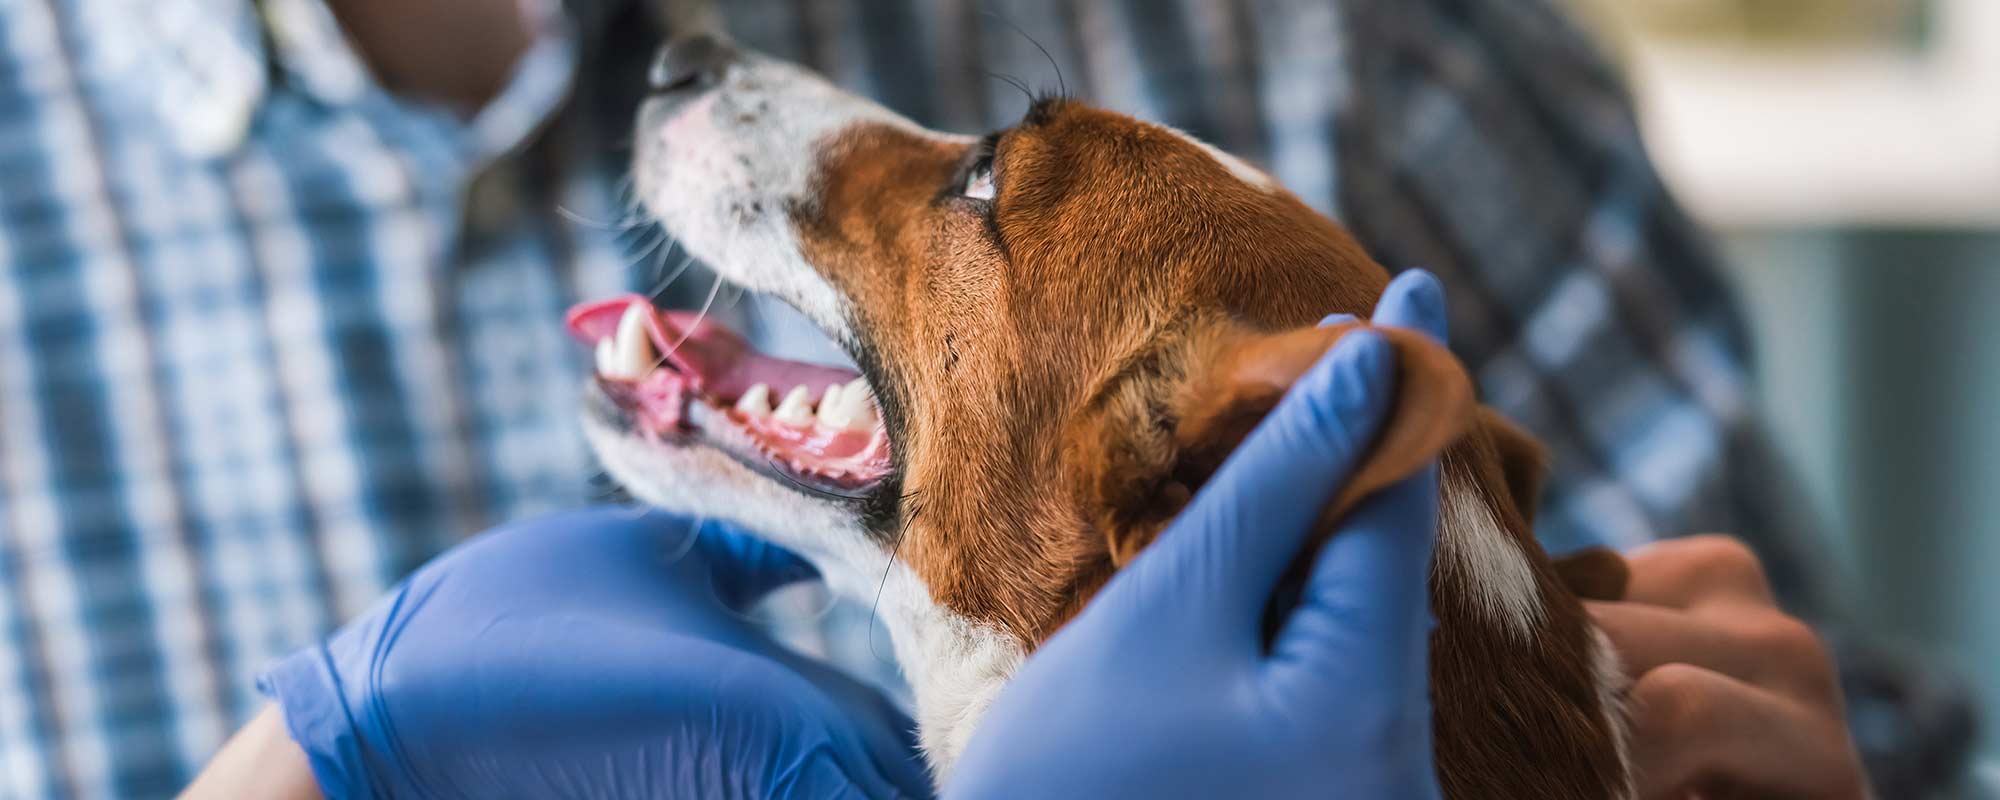 dog being examined by vet tech